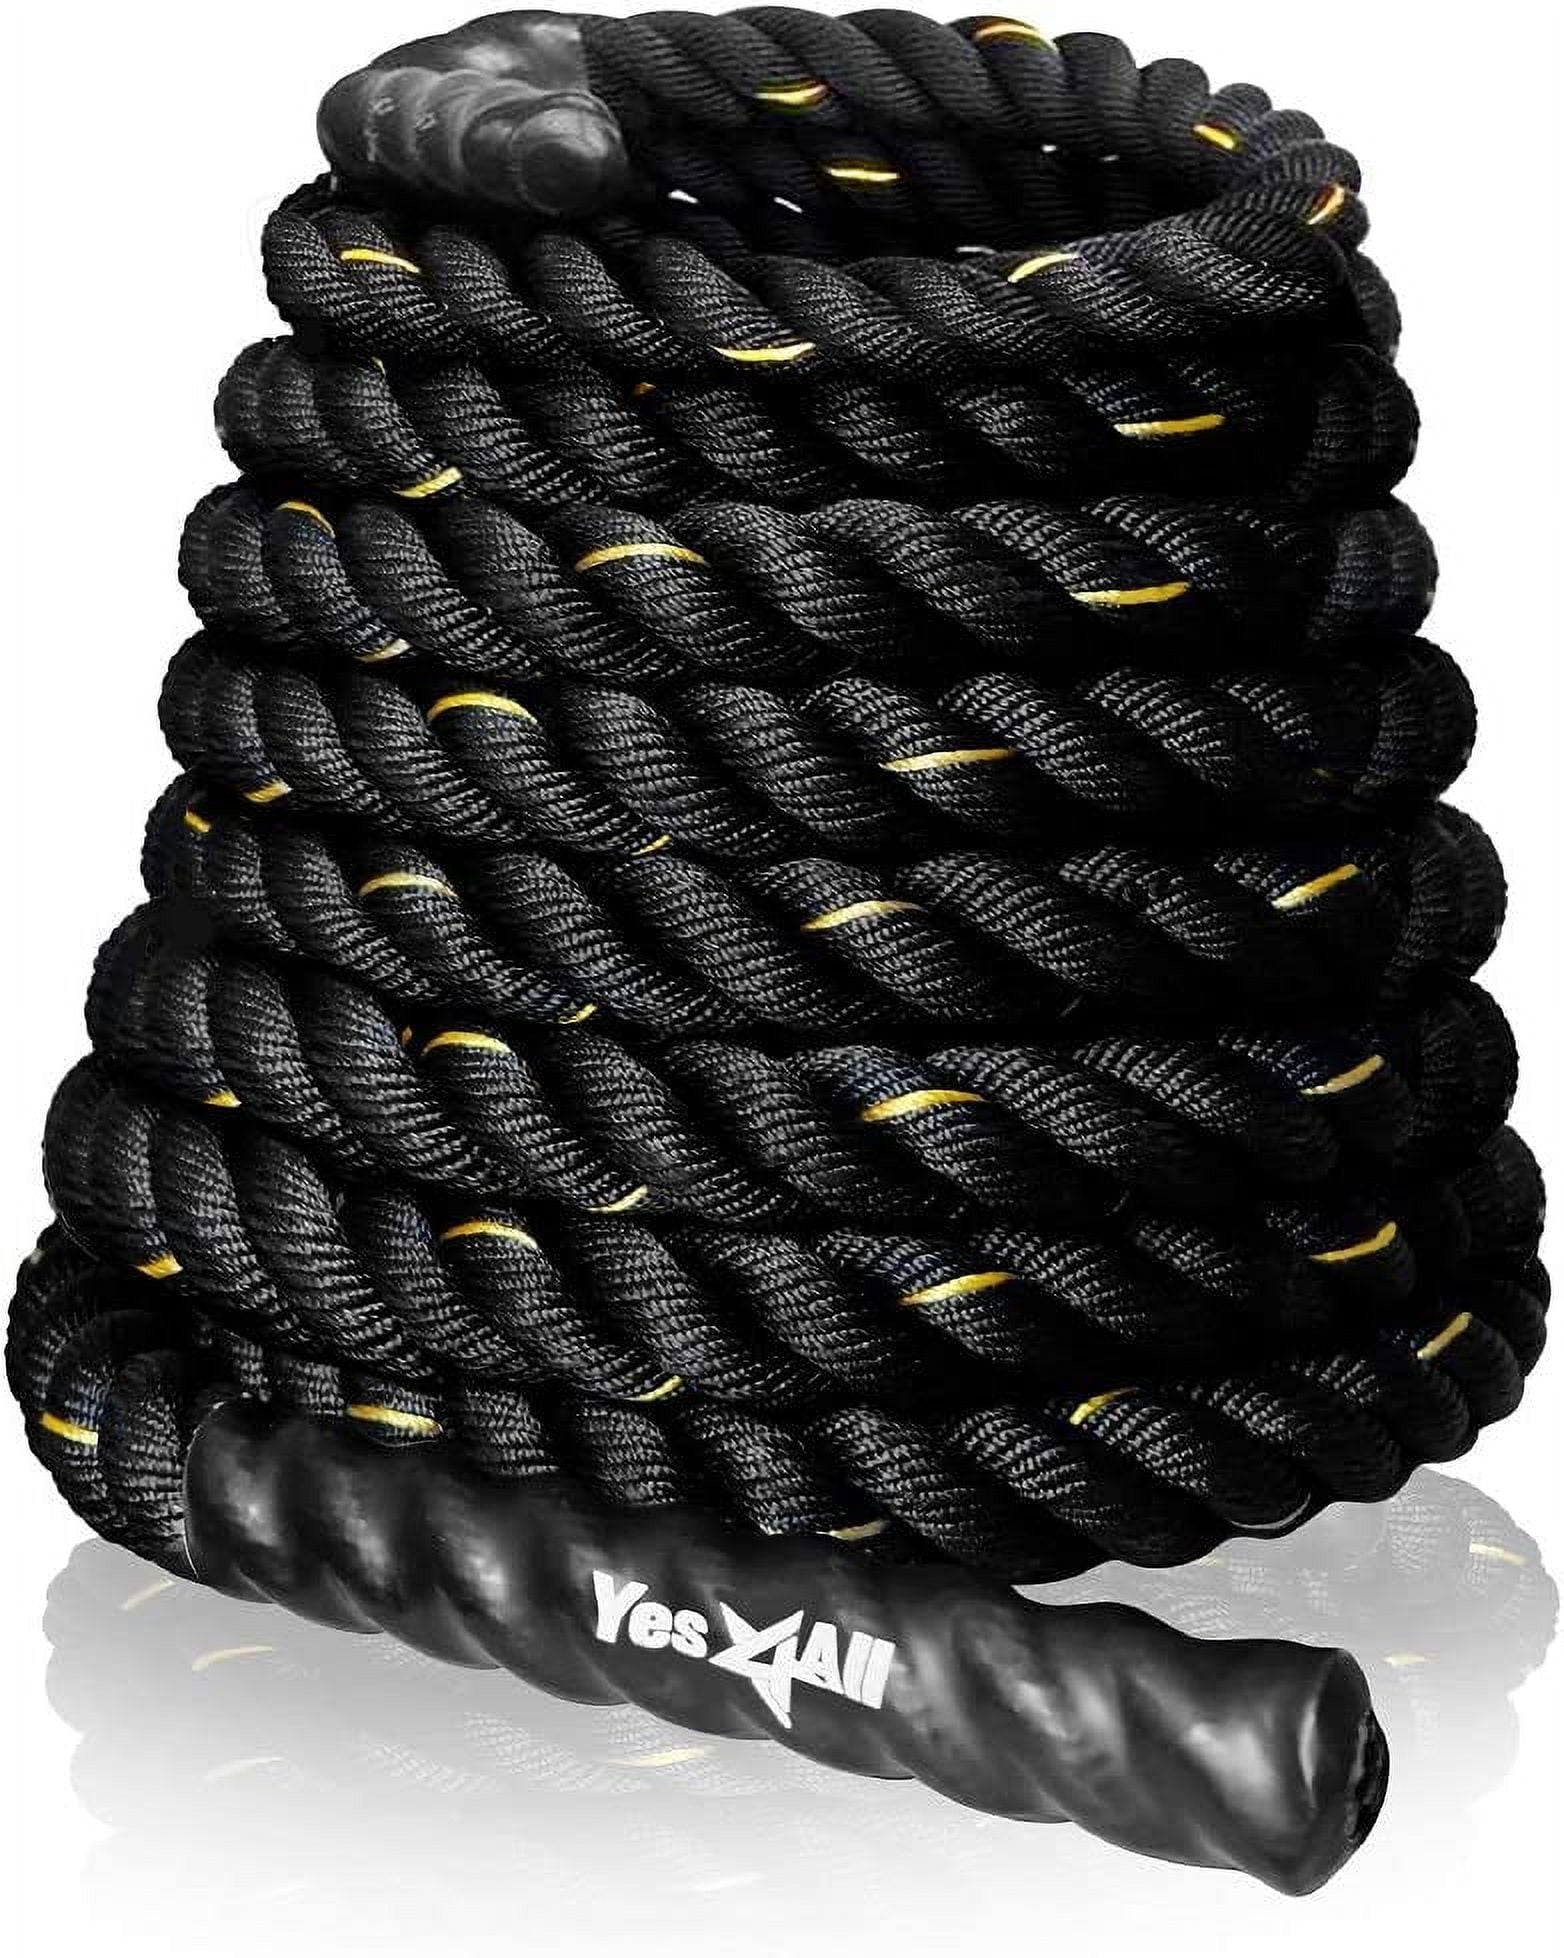 Yes4All 2.0 in Diameter Battle Rope, 50 ft Length Workout Rope, Poly Dacron  Material